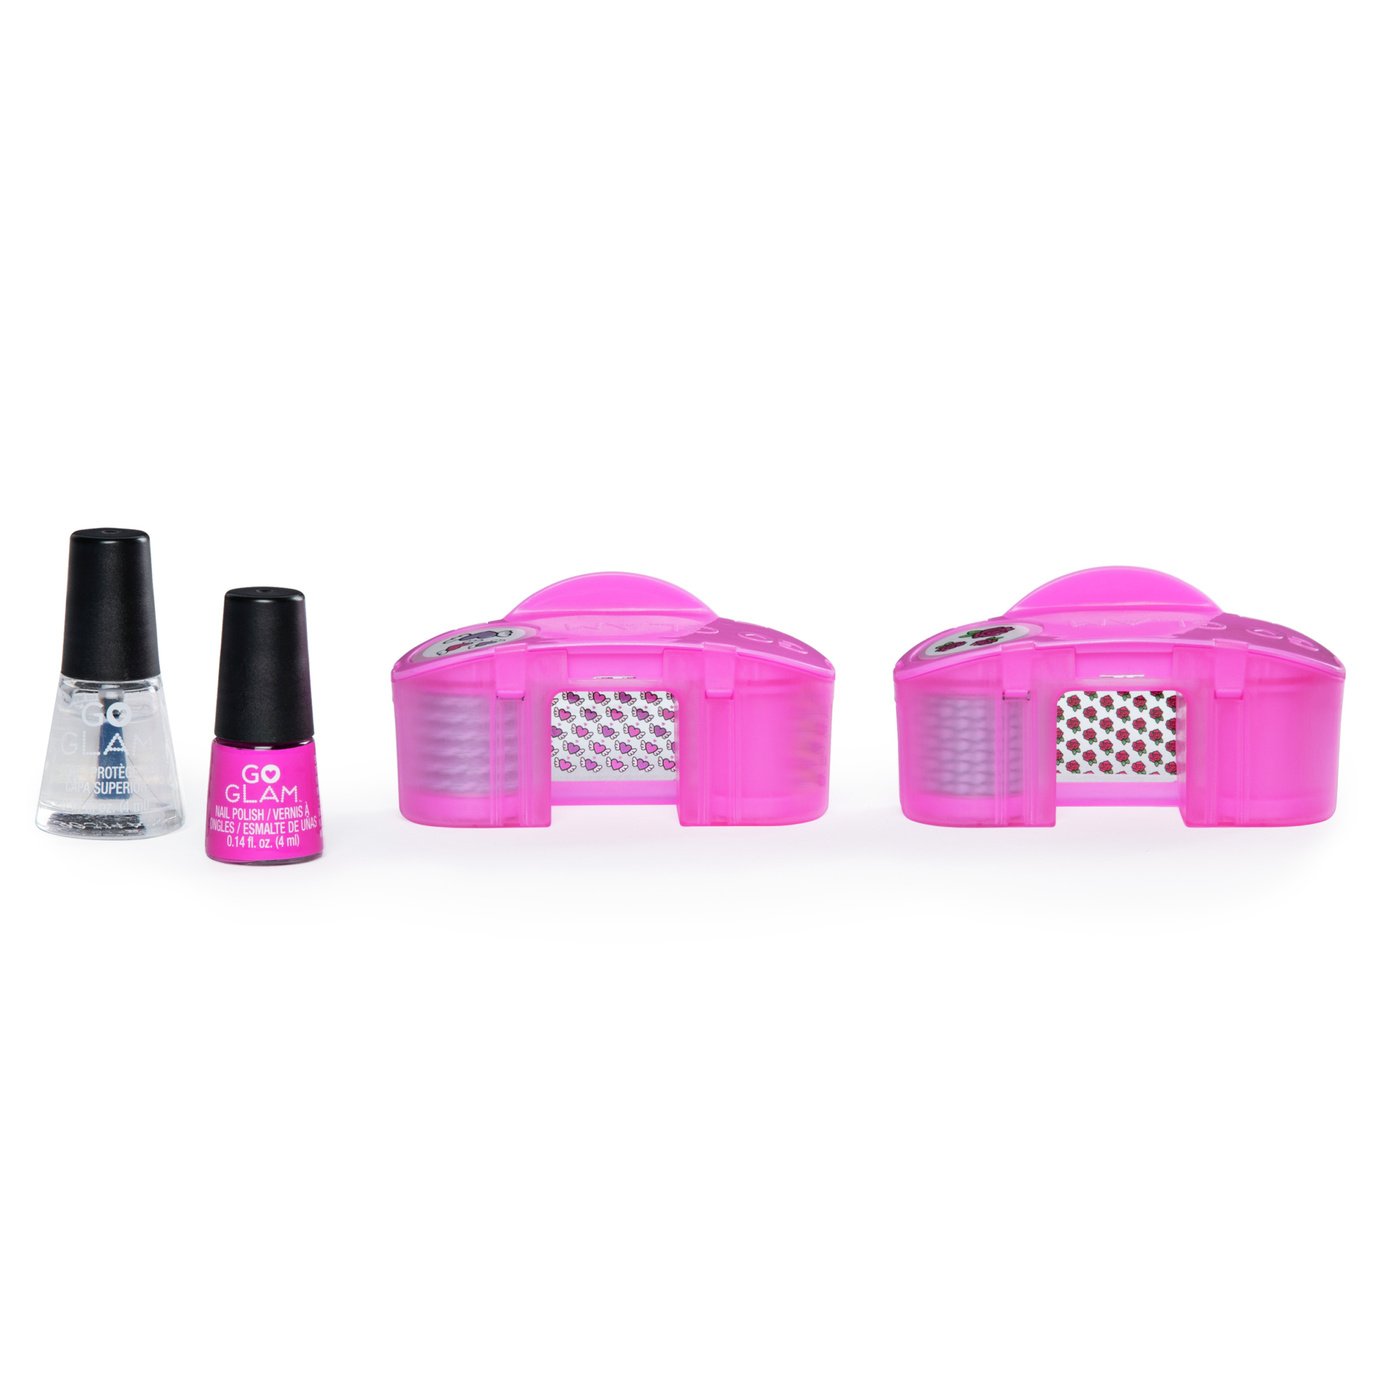 GO GLAM Nail Stamper Refills Review